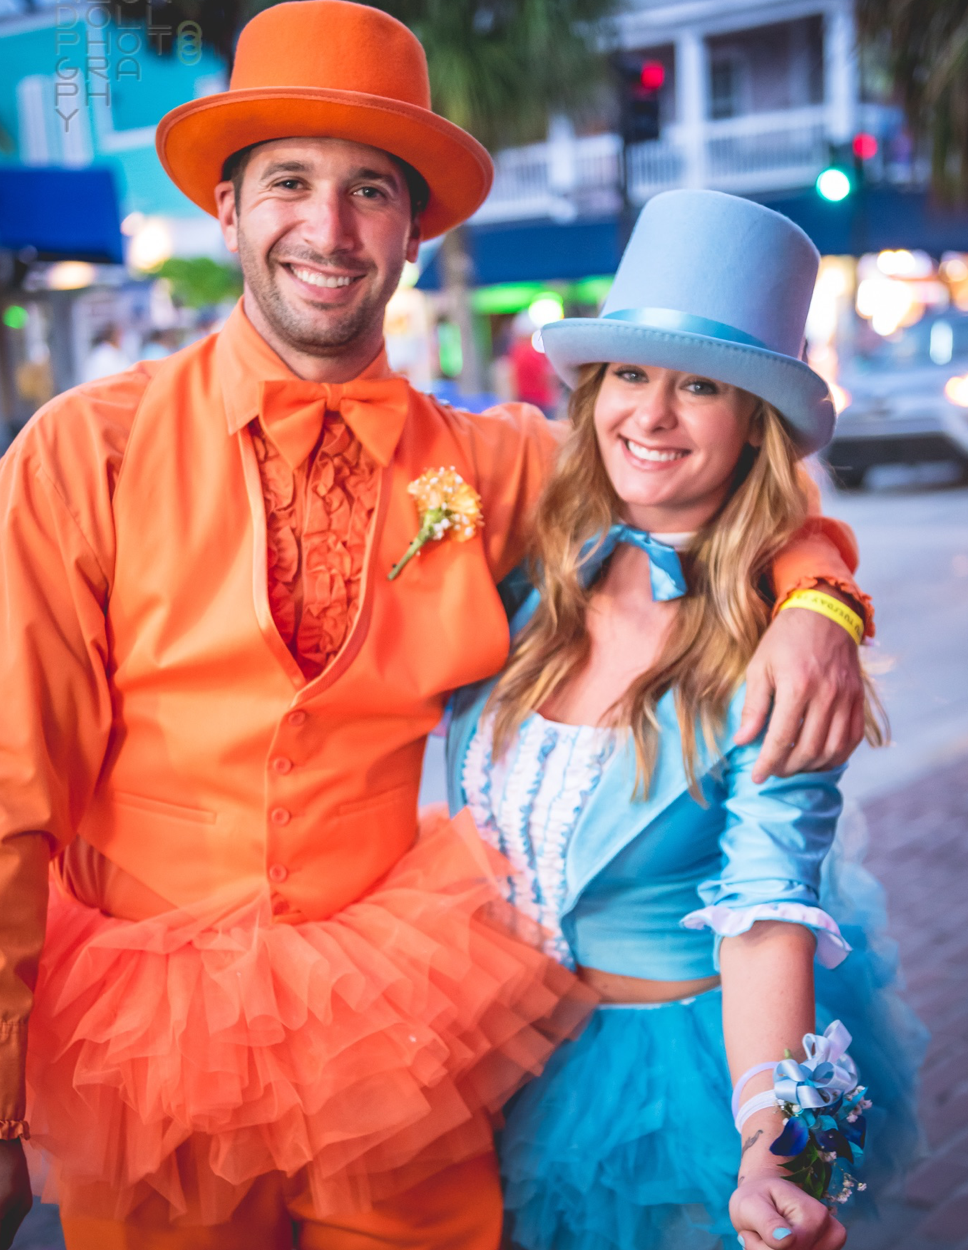 Male and female couple smiling at Fantasy Fest in their Dumb and Dumber themed costumes with tutus.